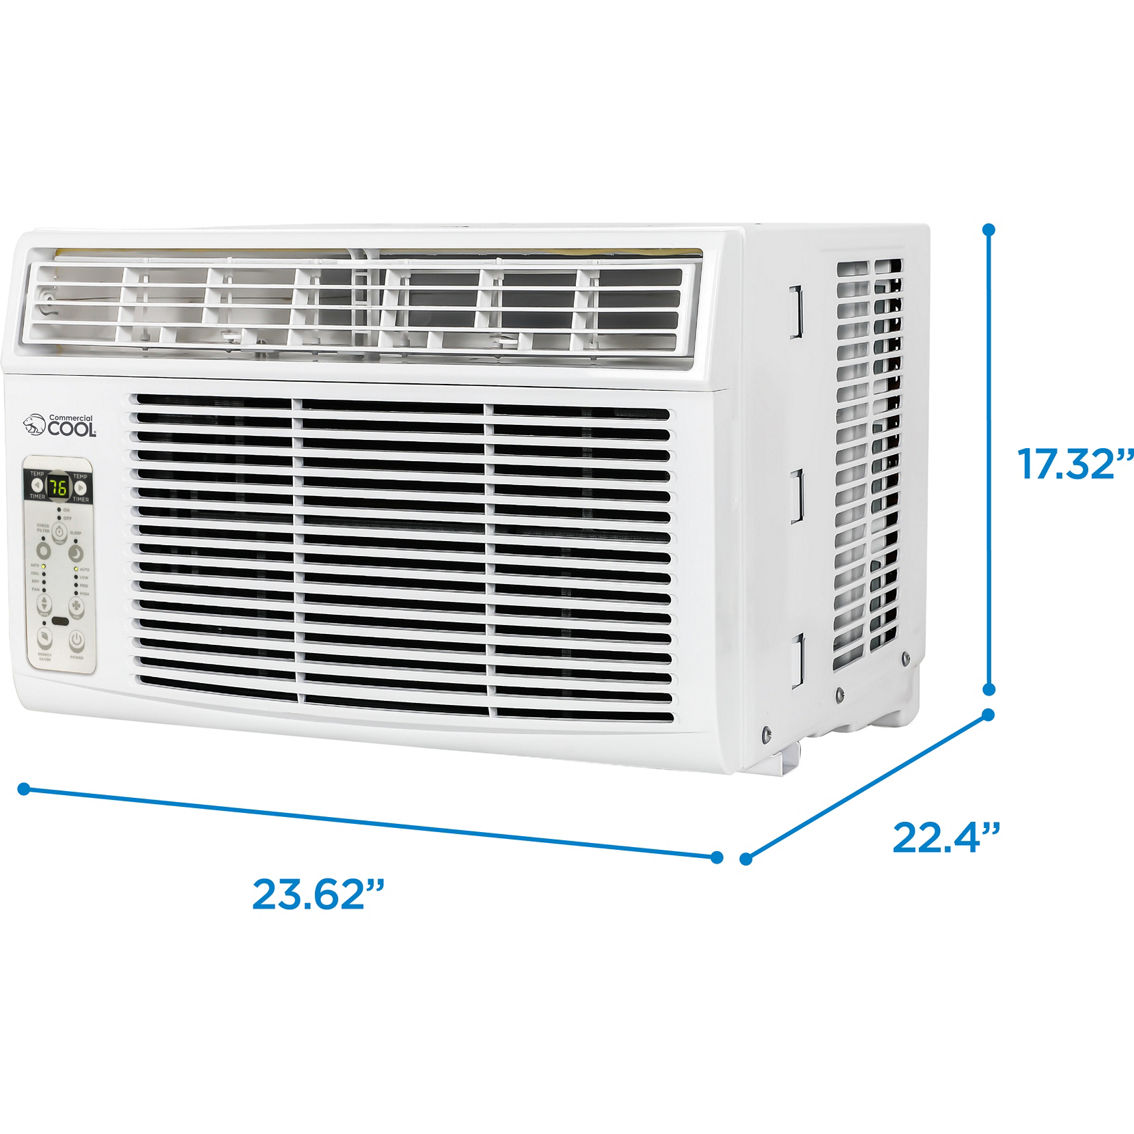 Commercial Cool 10, 000 BTU Window Air Conditioner - Image 2 of 7